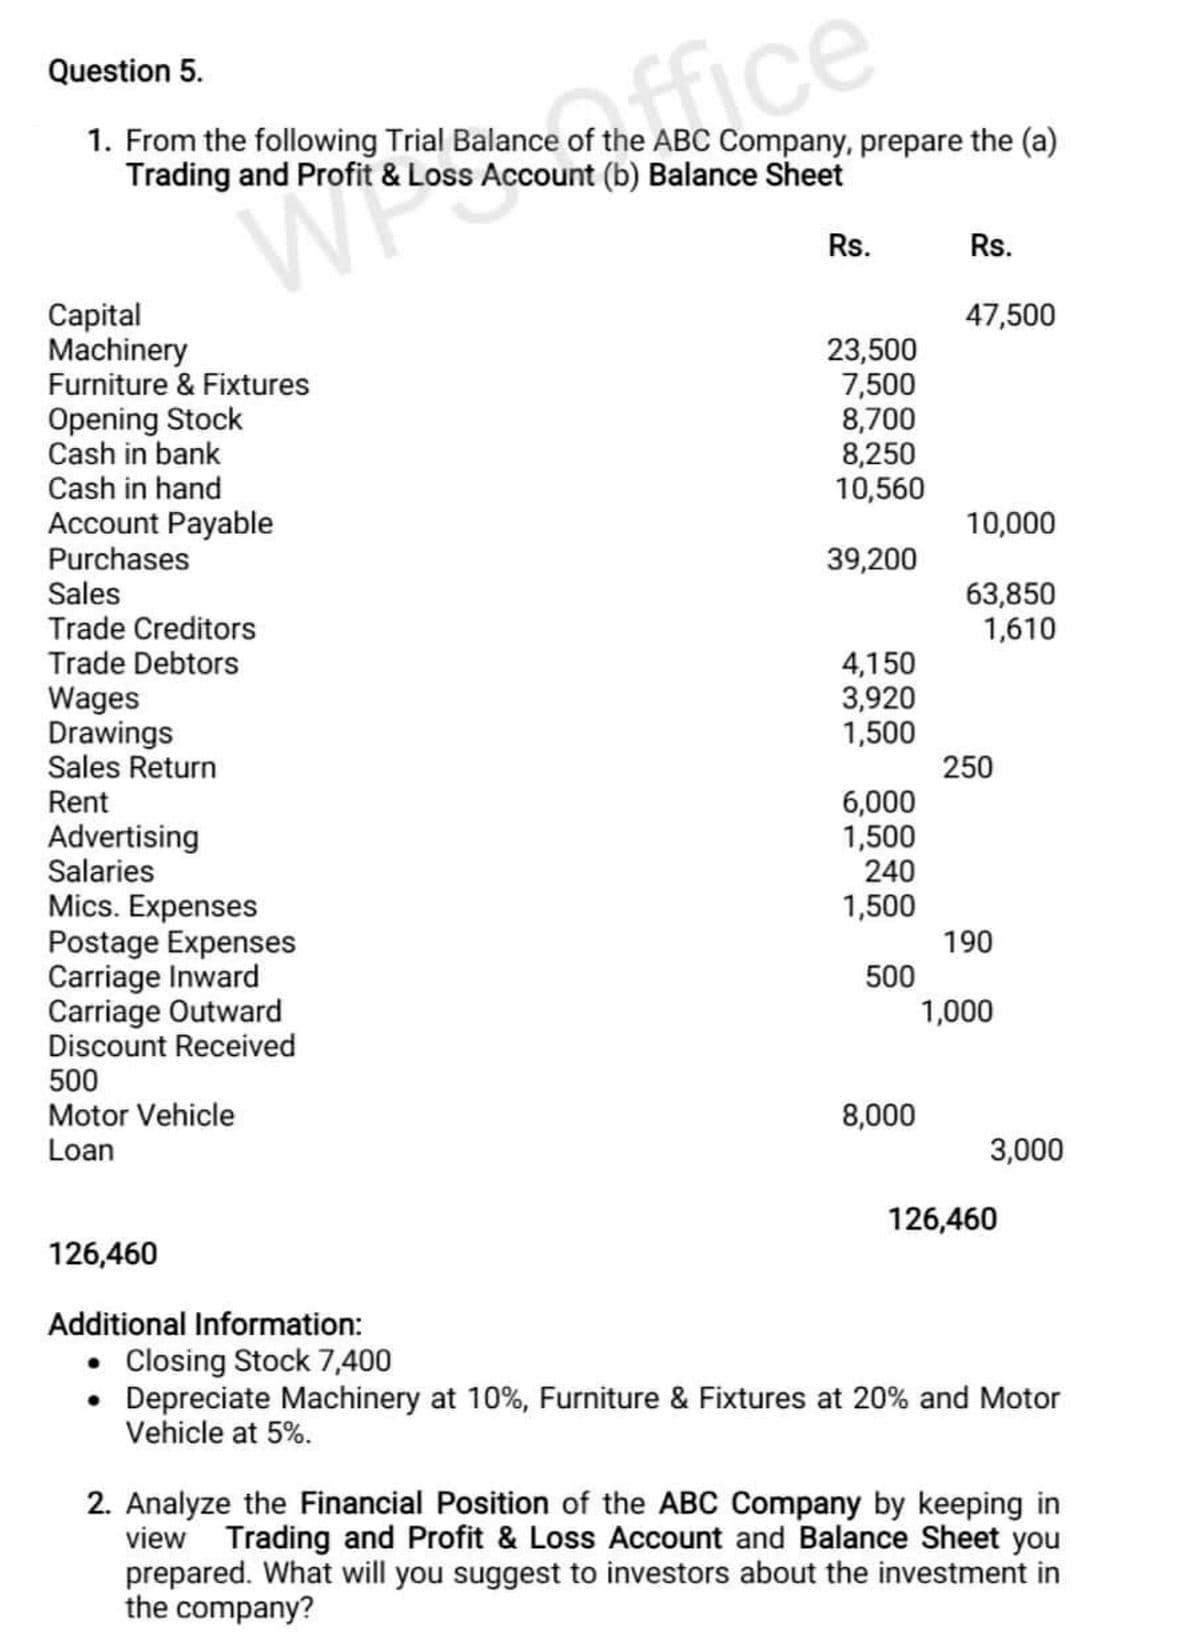 ffice
Question 5.
1. From the following Trial Balance of the ABC Company, prepare the (a)
Trading and Profit & Loss Account (b) Balance Sheet
Rs.
Rs.
Capital
Machinery
Furniture & Fixtures
47,500
Opening Stock
Cash in bank
Cash in hand
Account Payable
23,500
7,500
8,700
8,250
10,560
10,000
Purchases
Sales
Trade Creditors
Trade Debtors
39,200
63,850
1,610
4,150
3,920
1,500
Wages
Drawings
Sales Return
Rent
250
Advertising
Salaries
6,000
1,500
240
Mics. Expenses
Postage Expenses
Carriage Inward
Carriage Outward
Discount Received
1,500
190
500
1,000
500
Motor Vehicle
Loan
8,000
3,000
126,460
126,460
Additional Information:
Closing Stock 7,400
Depreciate Machinery at 10%, Furniture & Fixtures at 20% and Motor
Vehicle at 5%.
2. Analyze the Financial Position of the ABC Company by keeping in
view Trading and Profit & Loss Account and Balance Sheet you
prepared. What will you suggest to investors about the investment in
the company?
